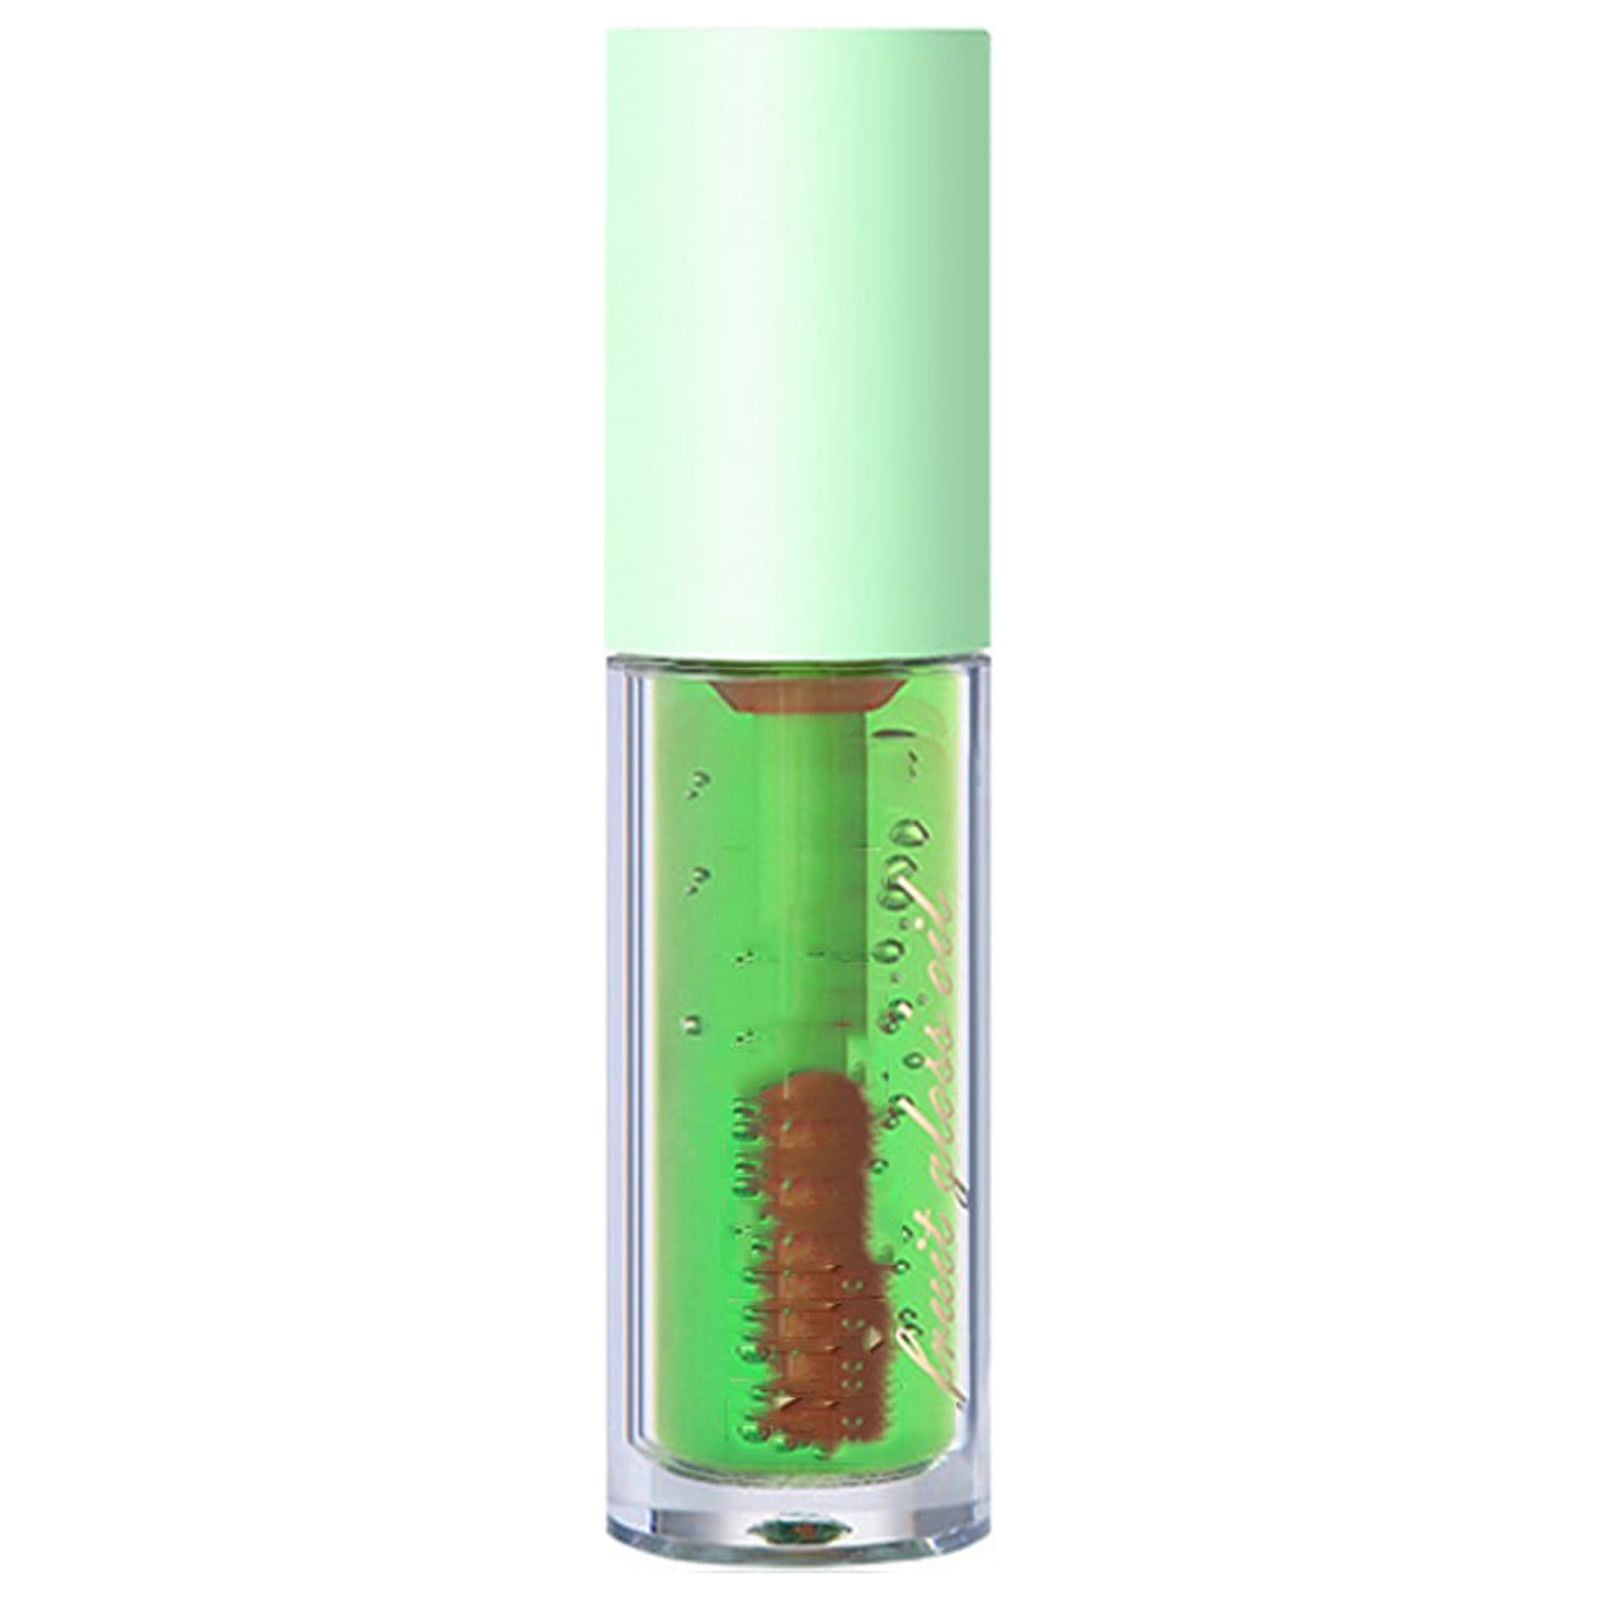 Highly Concentrated Liquid Color Pigment Colorants for Lip Gloss Makin –  Sea Hugs Sea Moss